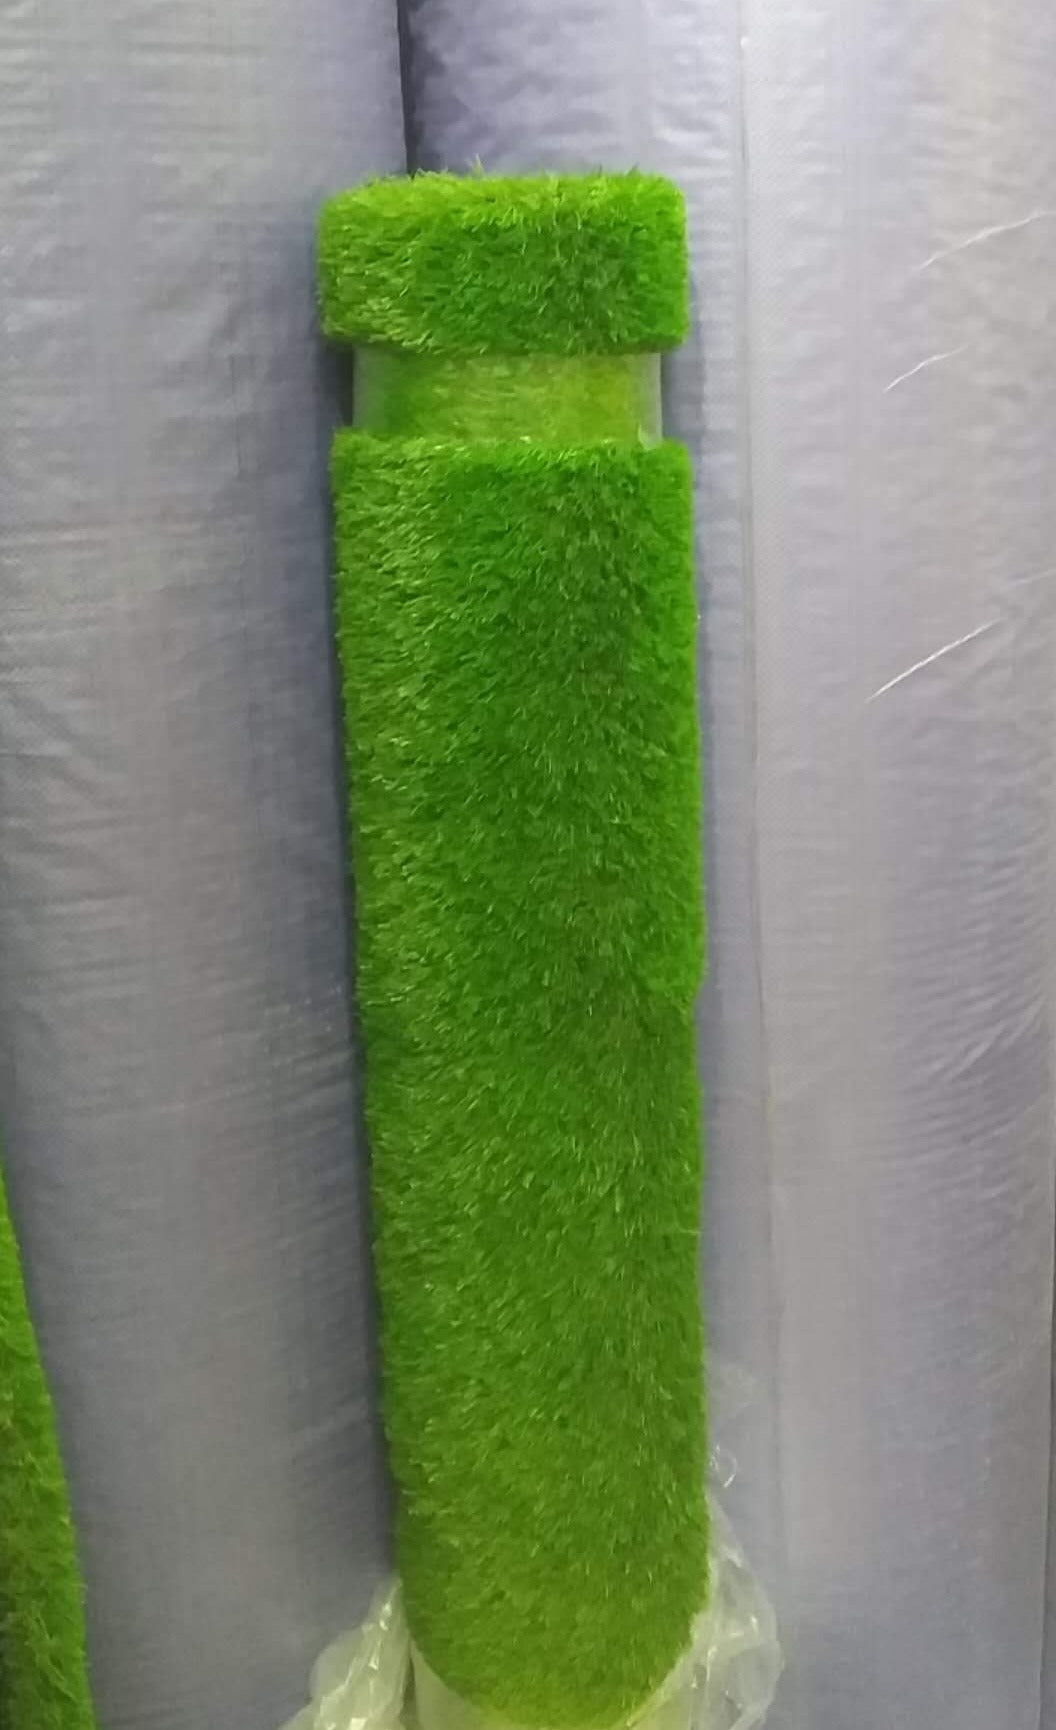 Artificial Turf  sale by Roll ,One roll 1mx3m, 25mm Thickness - HOCC PLAY